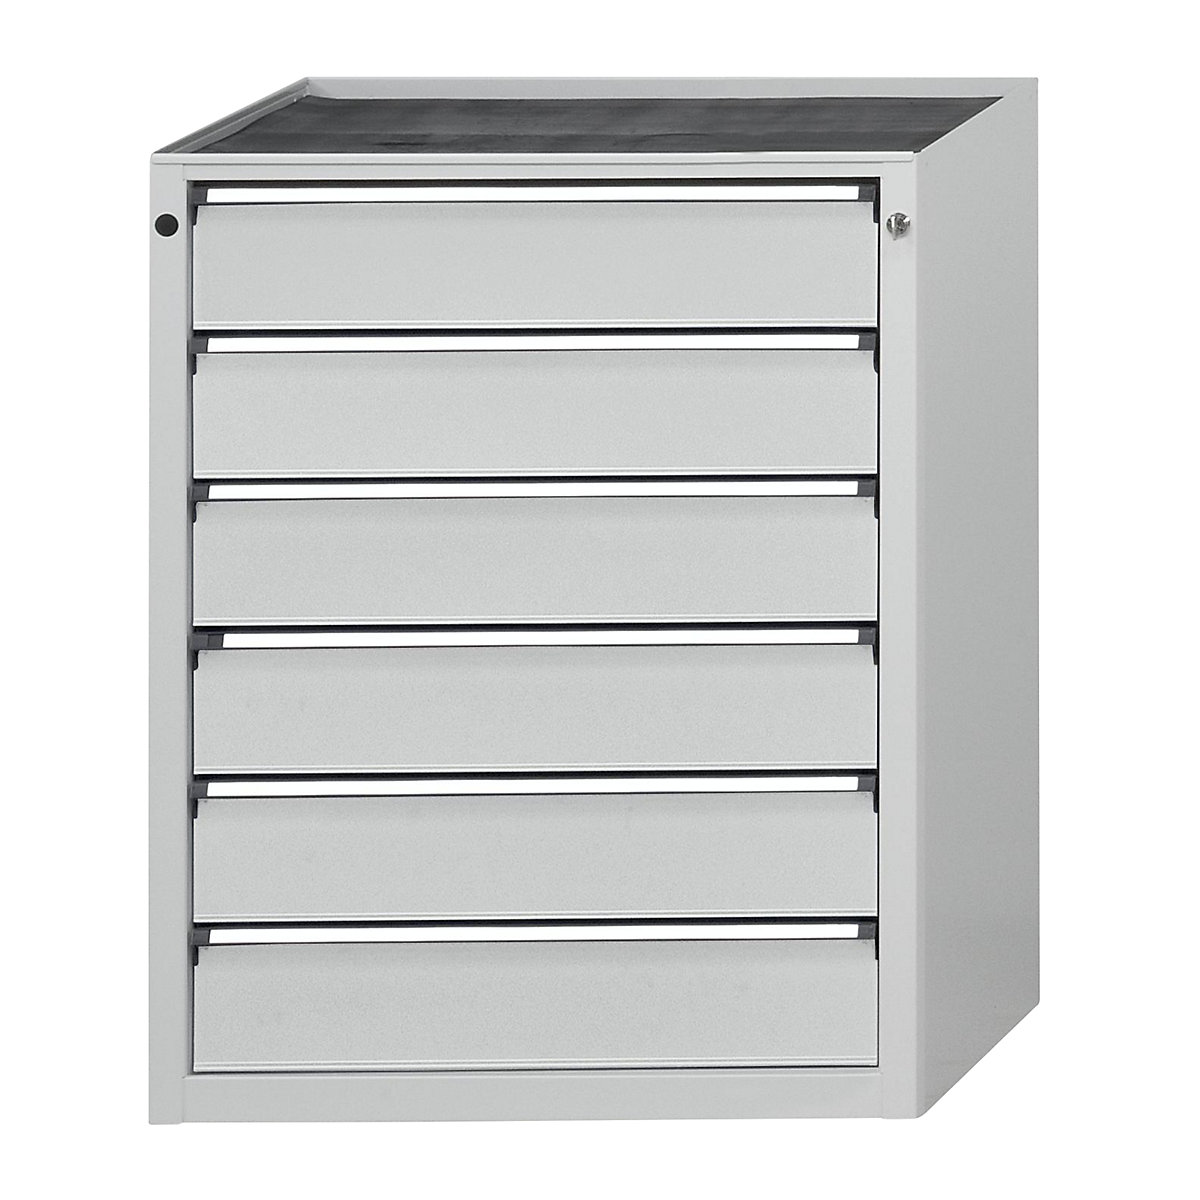 Drawer cupboard – ANKE, WxD 760 x 675 mm, 6 drawers, height 980 mm, front in light grey-12